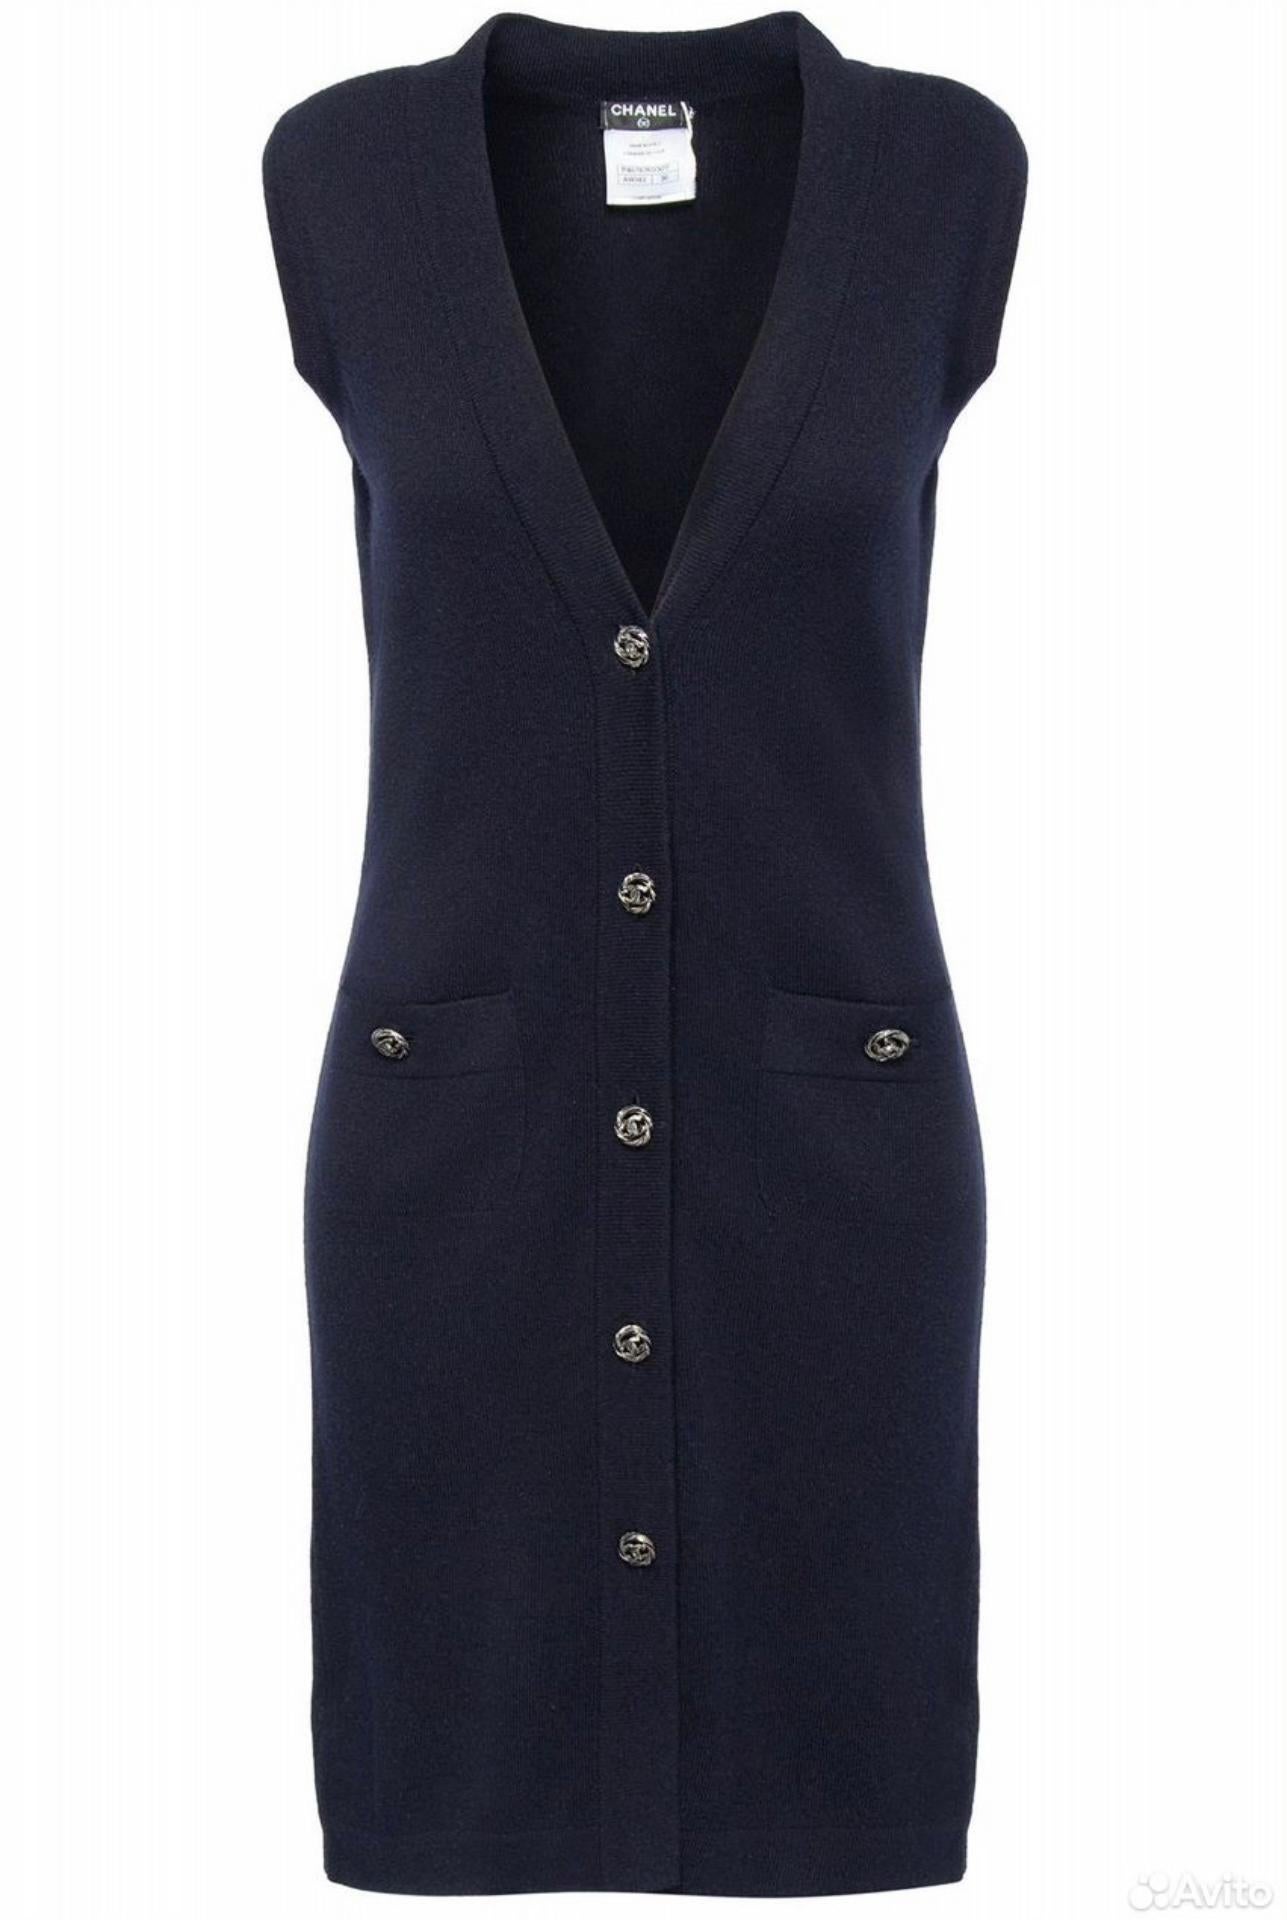 Chanel classical style navy cashmere vest with CC logo buttons.
Size mark 36 FR. Condition is pristine.